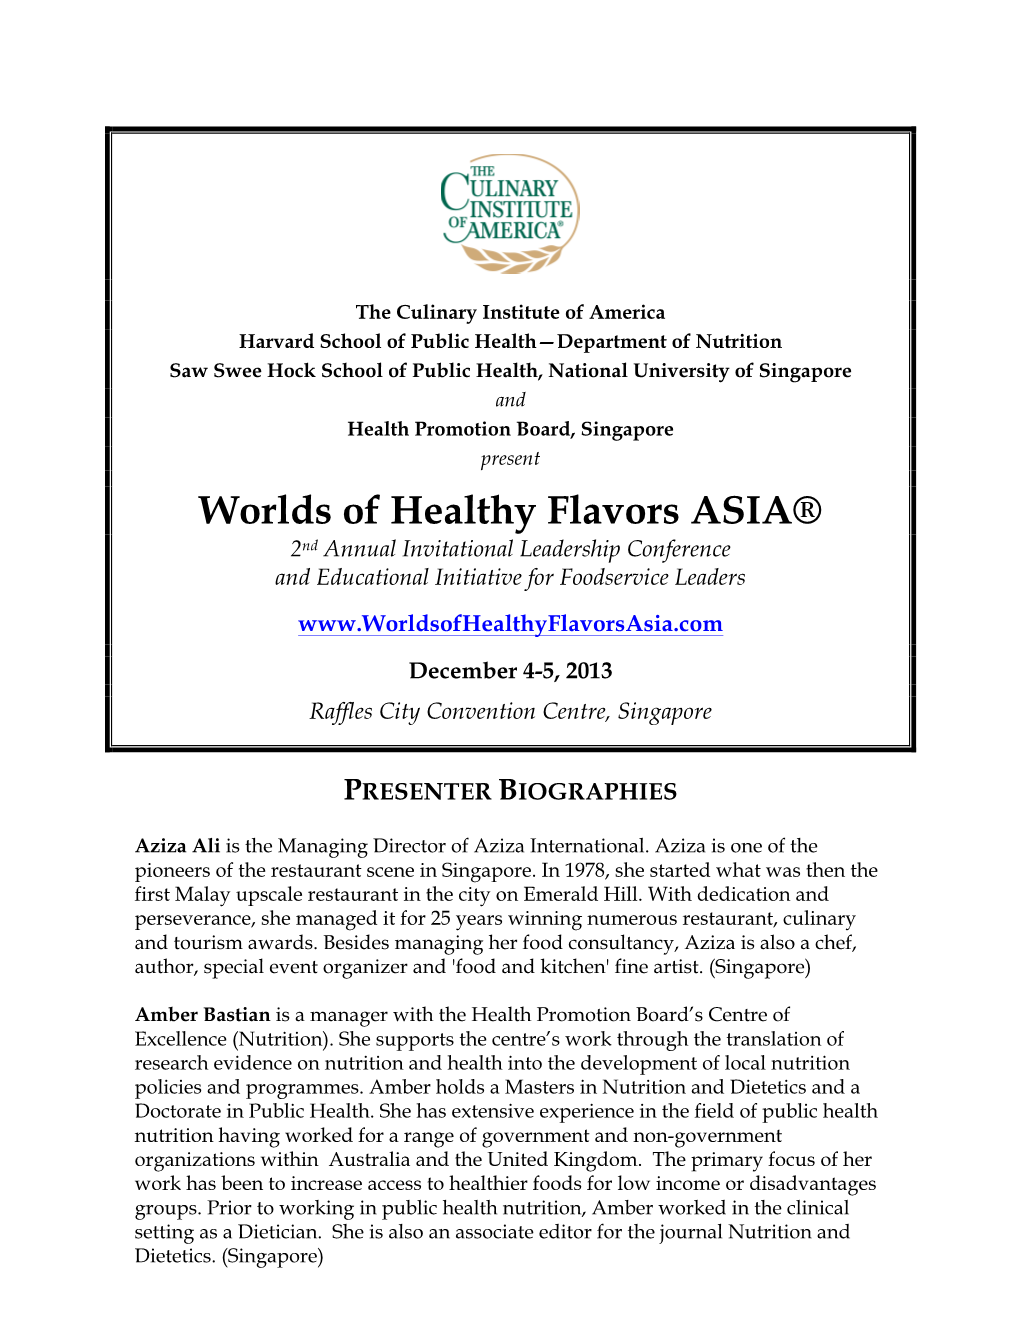 Worlds of Healthy Flavors ASIA® 2Nd Annual Invitational Leadership Conference and Educational Initiative for Foodservice Leaders